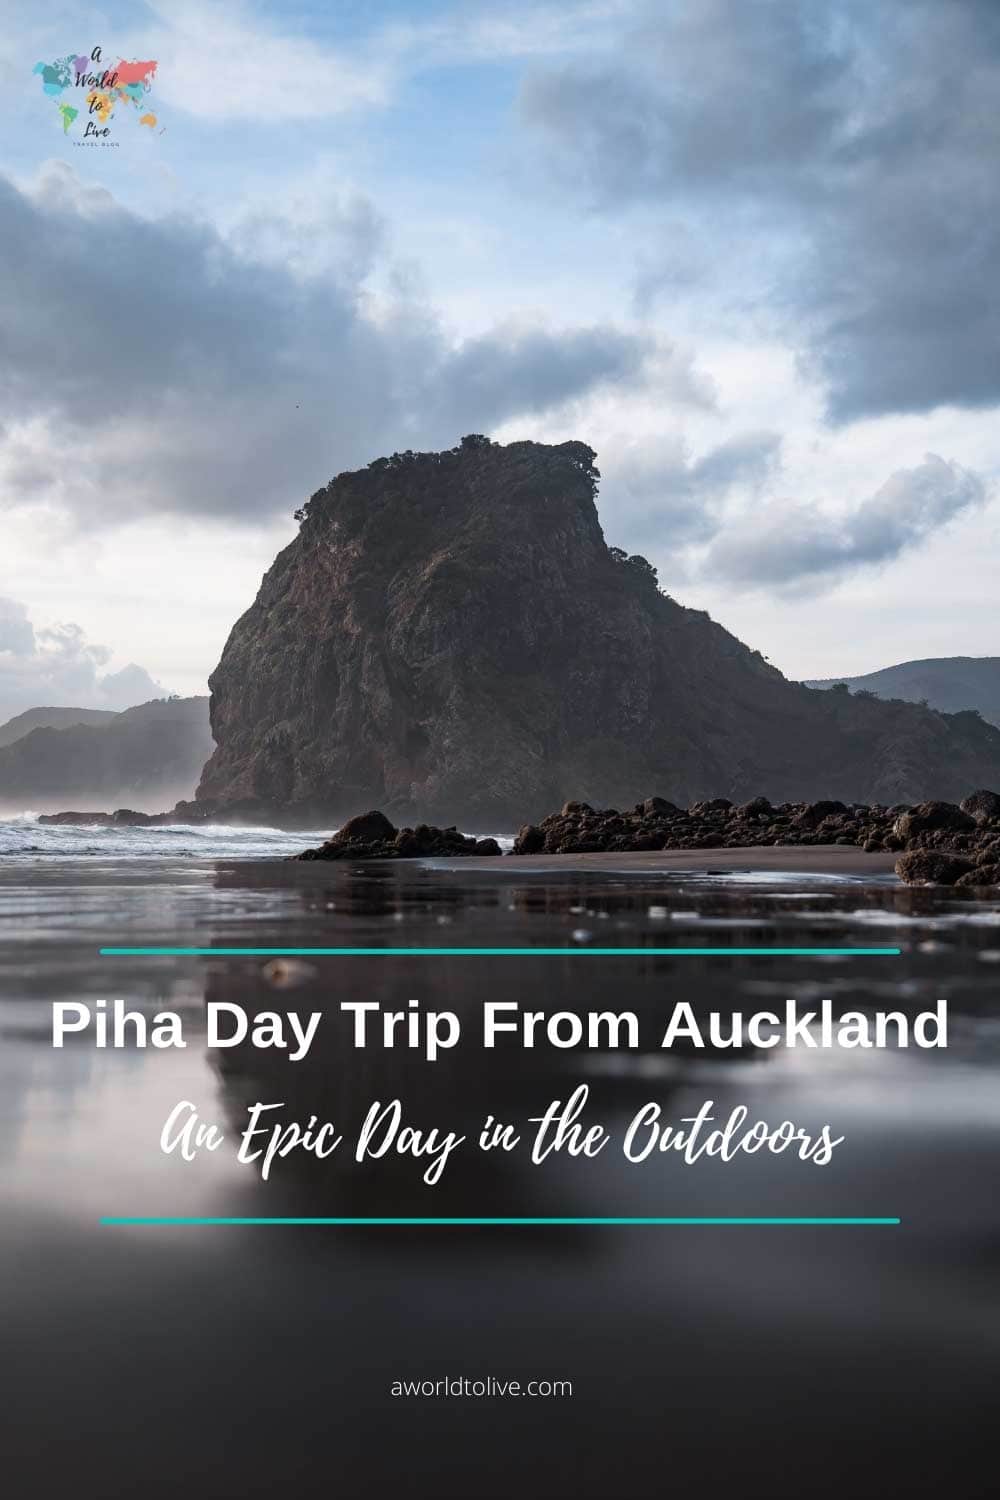 Black Sand Beach in Piha, New Zealand. Piha Day Trip from Auckland suggestion